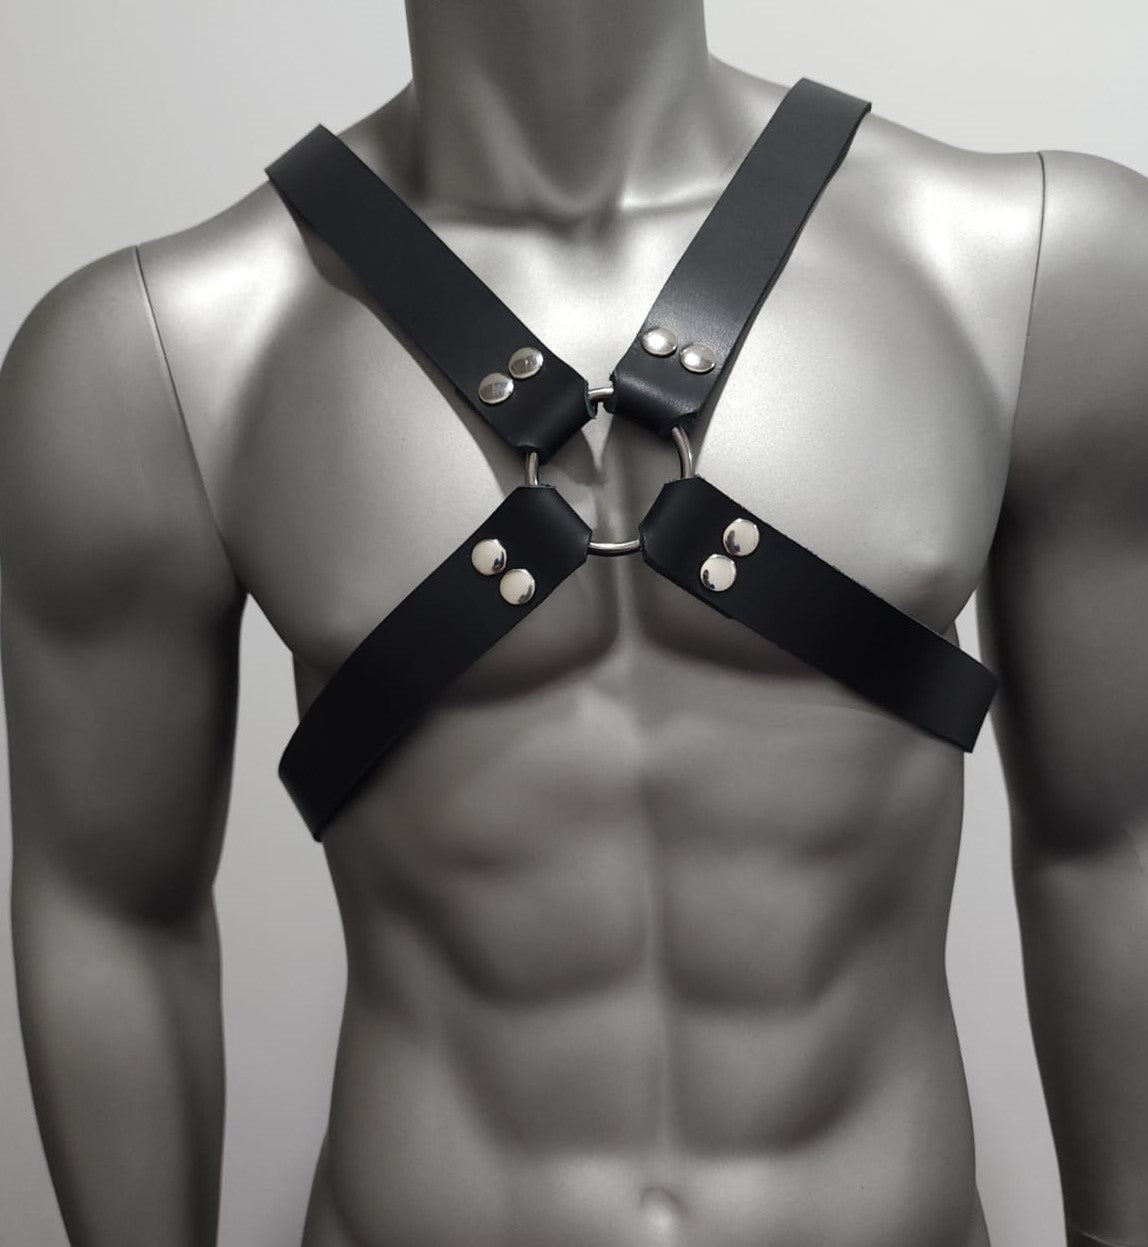 STANDARD HARNESS FOR MALES (RAILWAY)